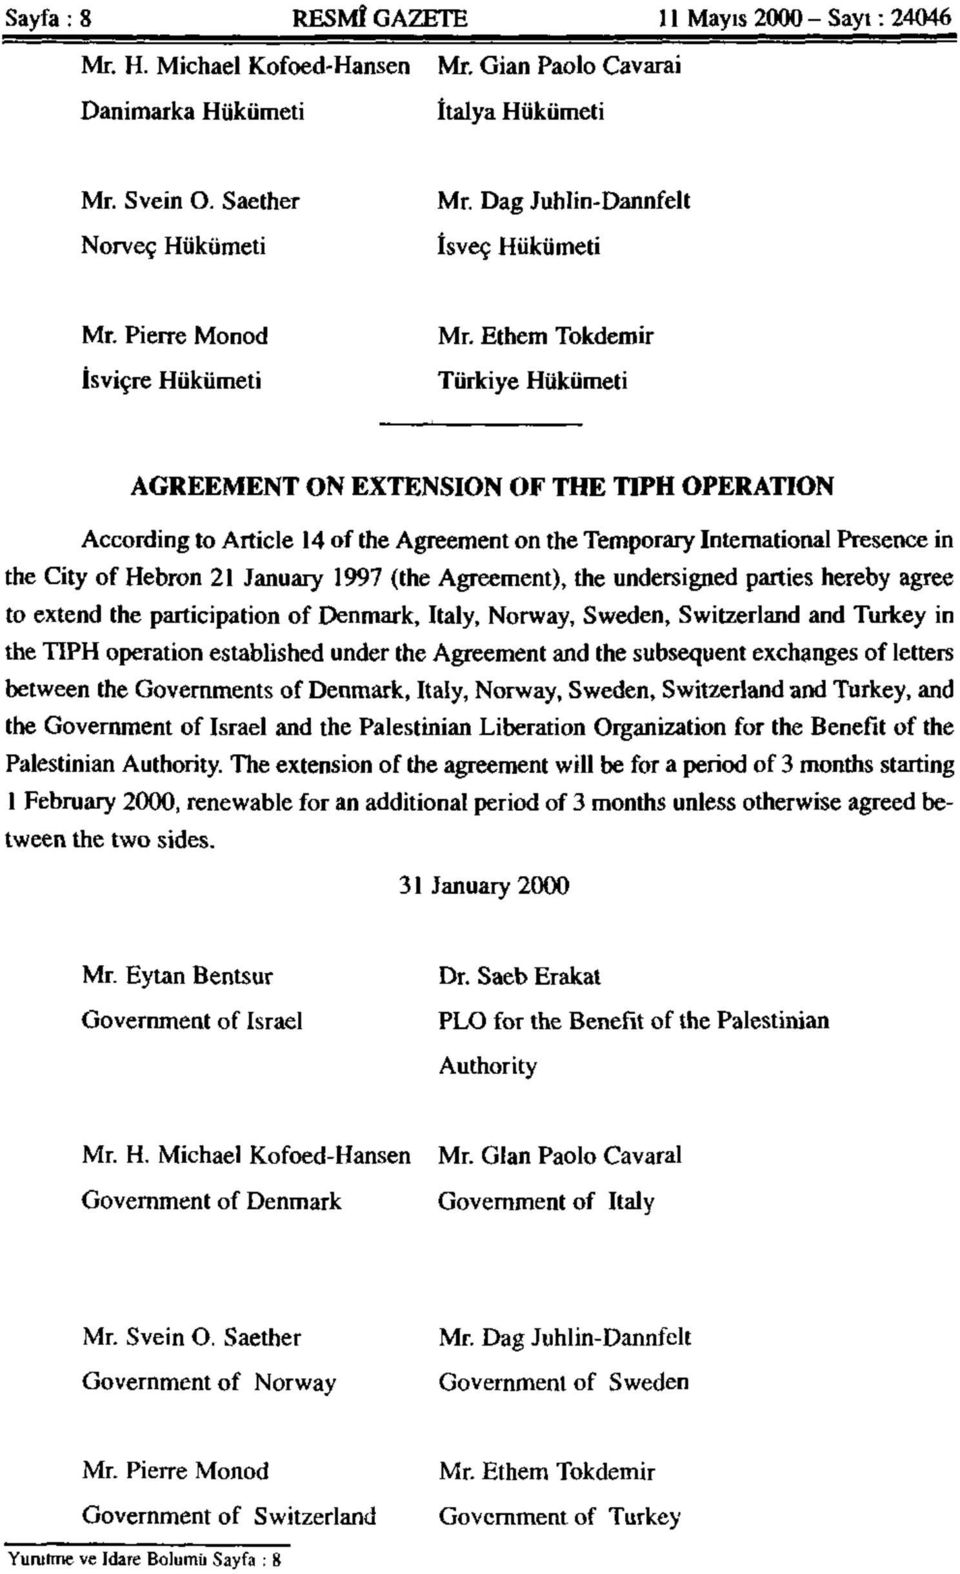 Ethem Tokdemir Türkiye Hükümeti AGREEMENT ON EXTENSION OF THE TIPH OPERATİON According to Article 14 of the Agreement on the Temporary International Presence in the City of Hebron 21 January 1997